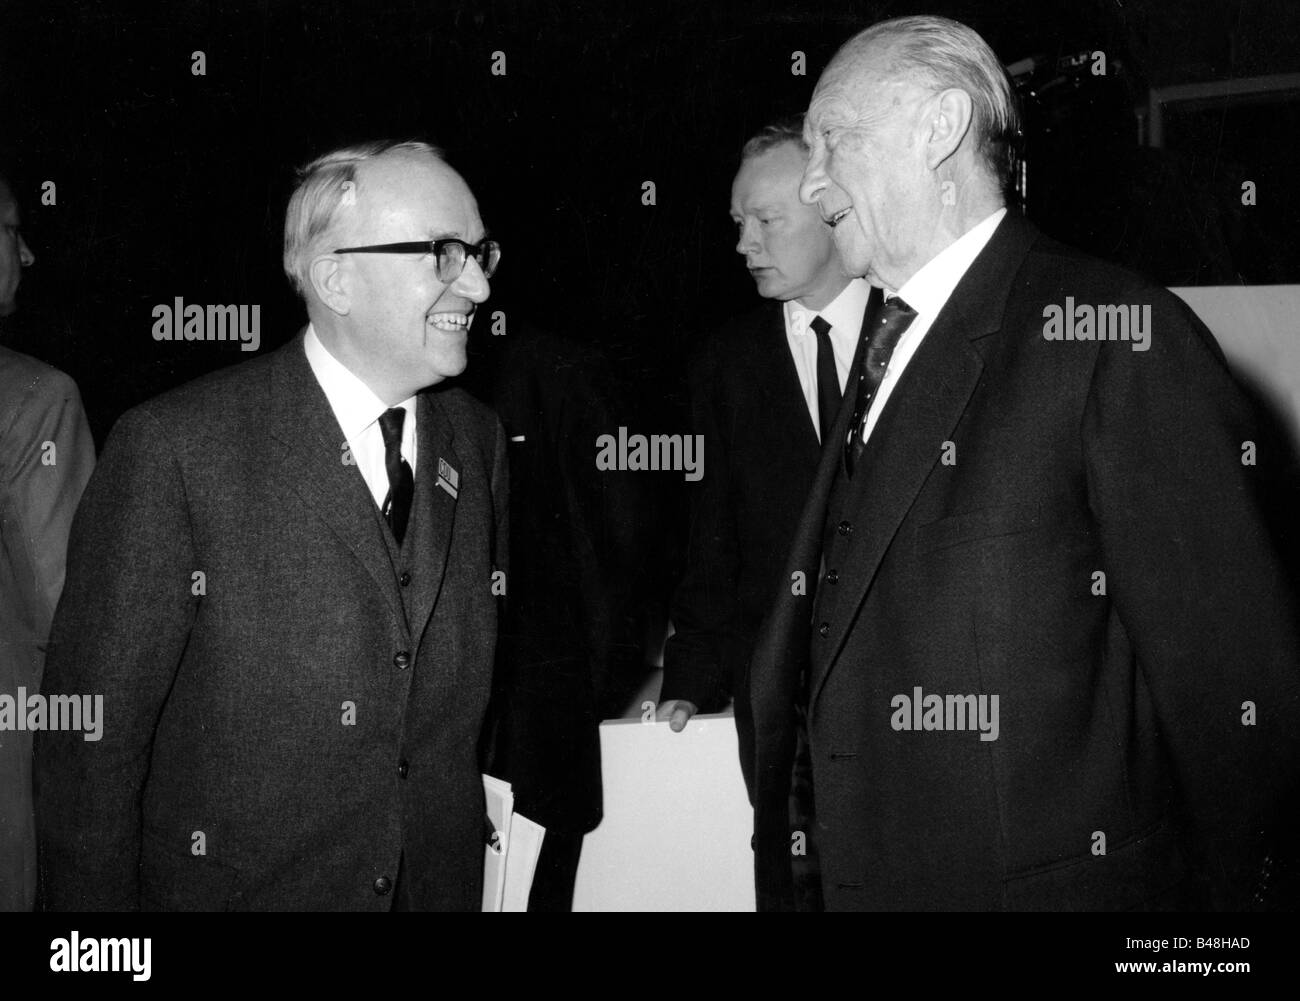 Adenauer, Konrad, 5.1.1876 - 19.4.1967, German politician (CDU) and statesman, Chancellor of Germany 1949 - 1963, half length, with President of the EWG Commission Walter Hallstein, 13th Federal Conference of the CDU party, Duesseldorf, 28.3.1965 - 31.3.1965, Stock Photo